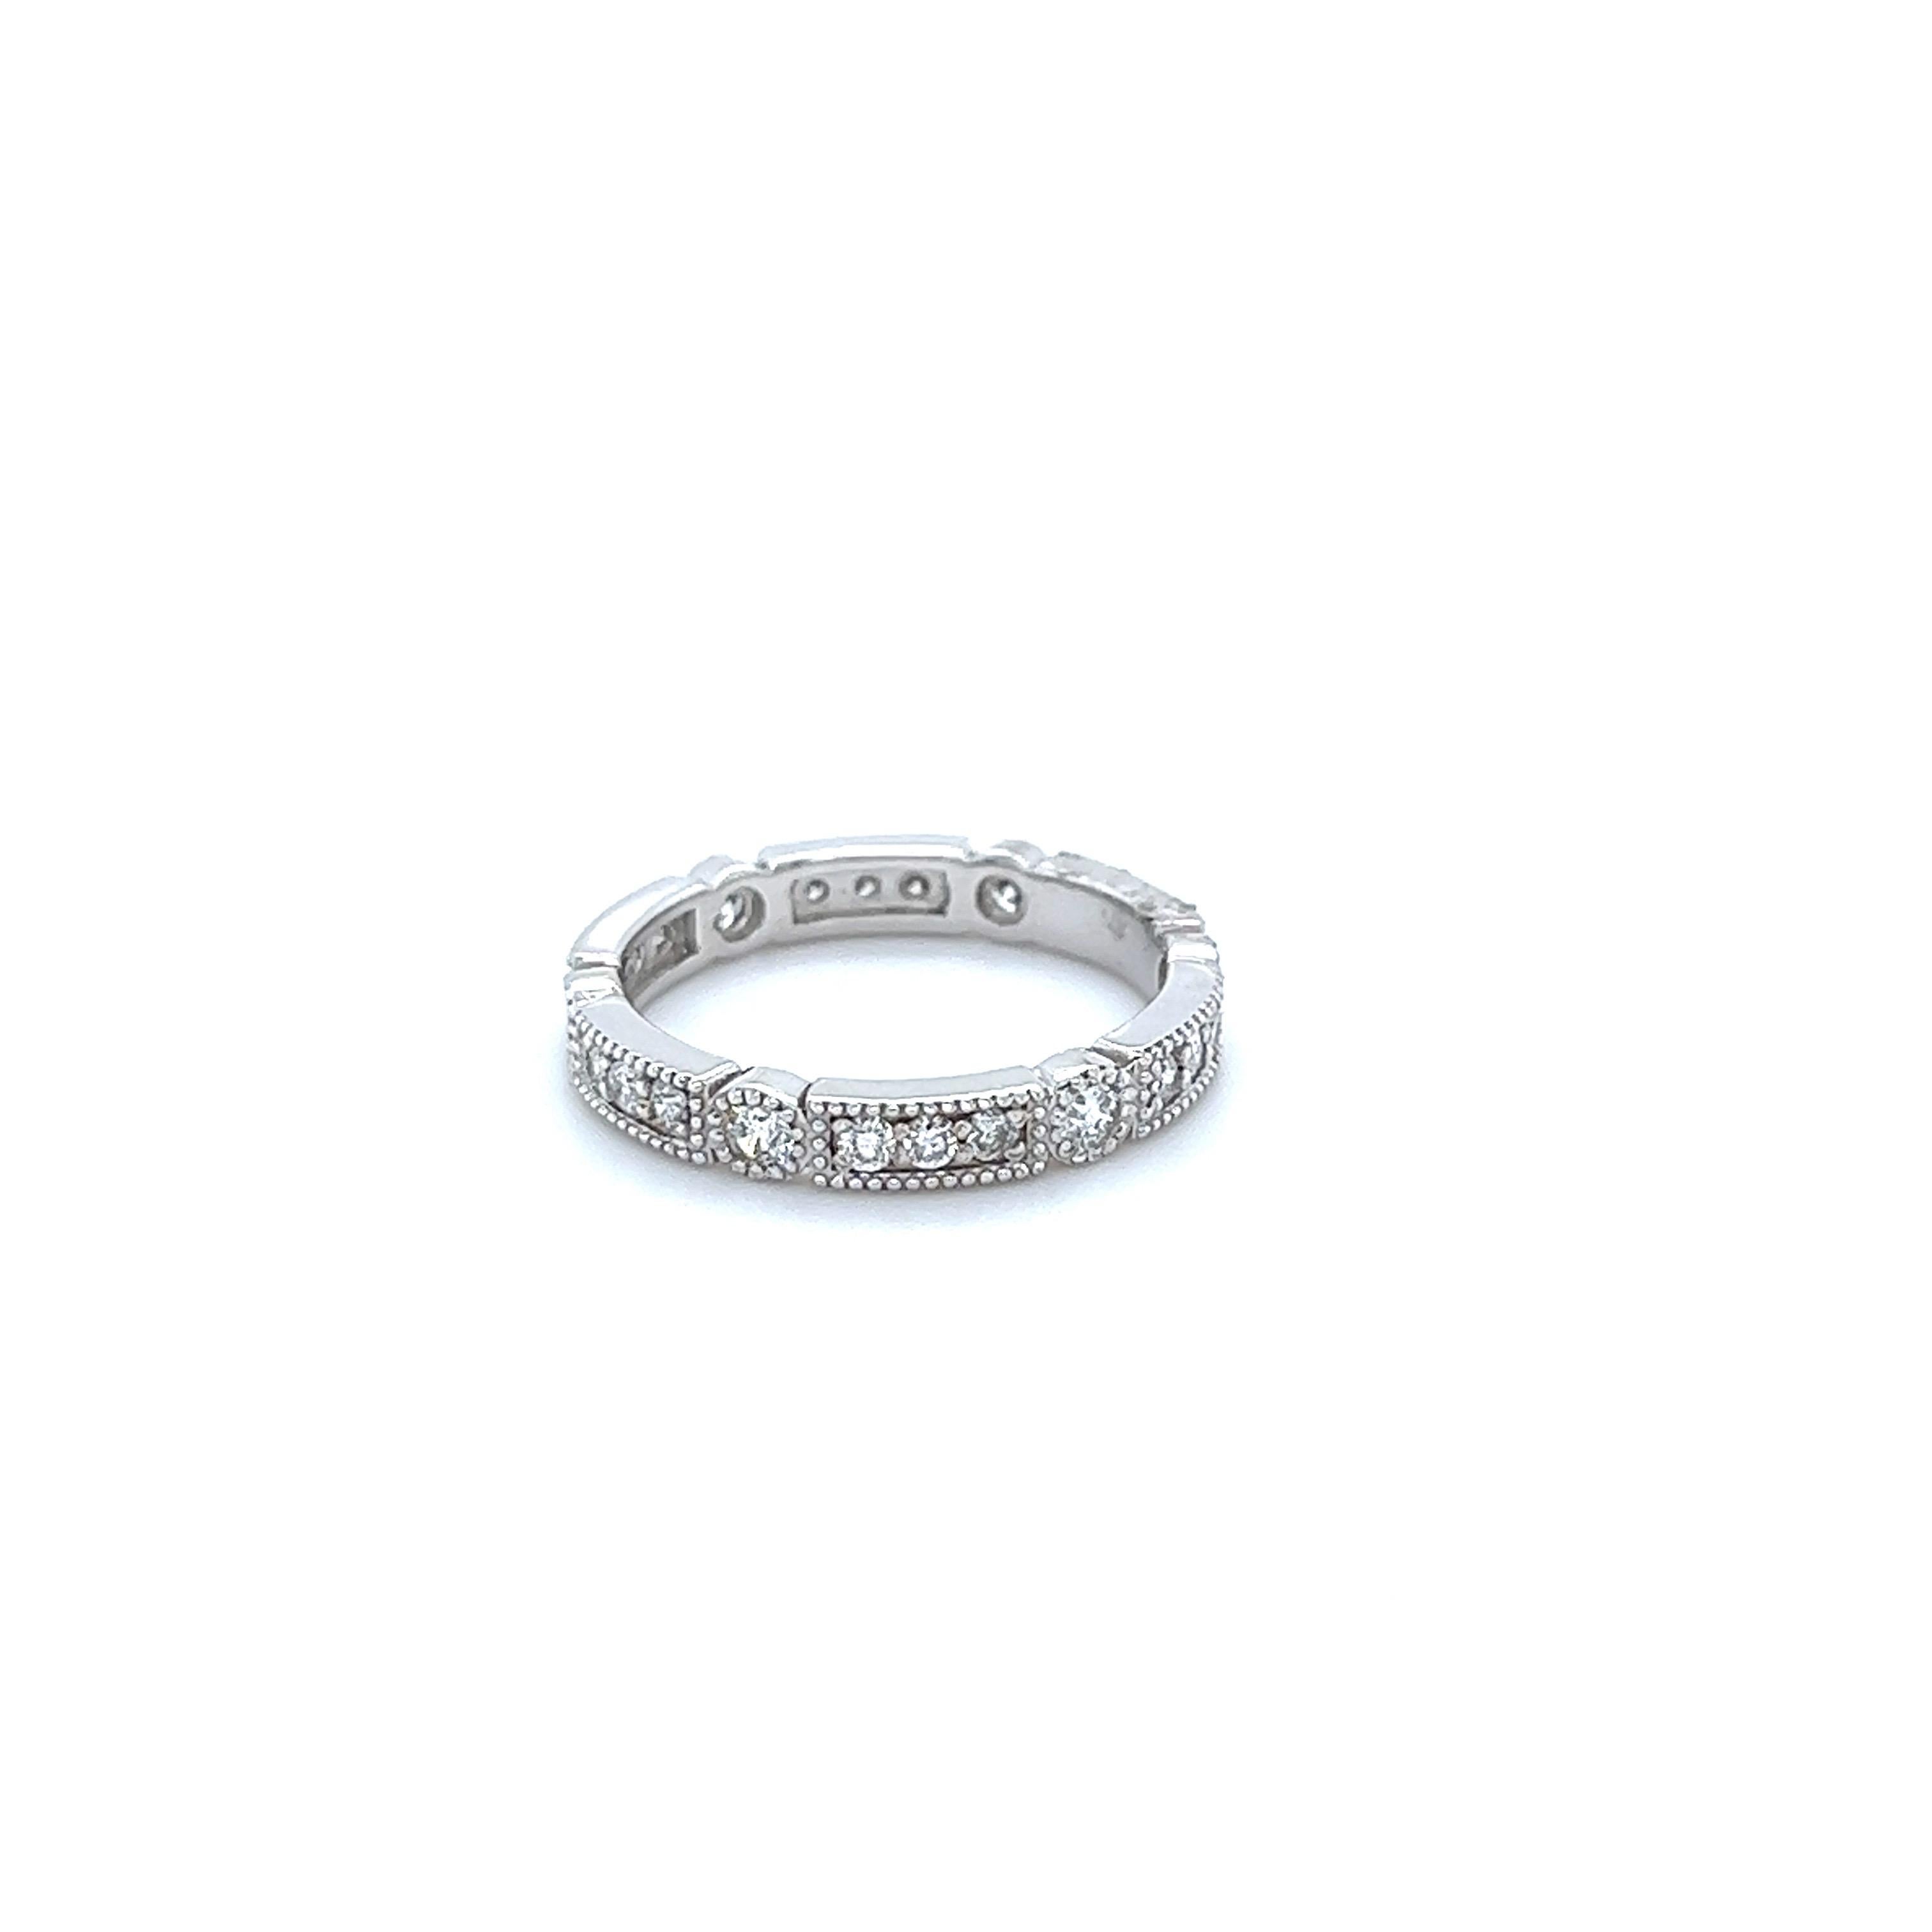 A beautiful band that can be worn as a single band or stack with other bands in other colors of Gold

This ring has 21 Round Cut Diamonds that weigh 0.65 Carats. The clarity and color of the diamonds are SI-F.

Crafted in 14 Karat White Gold and has